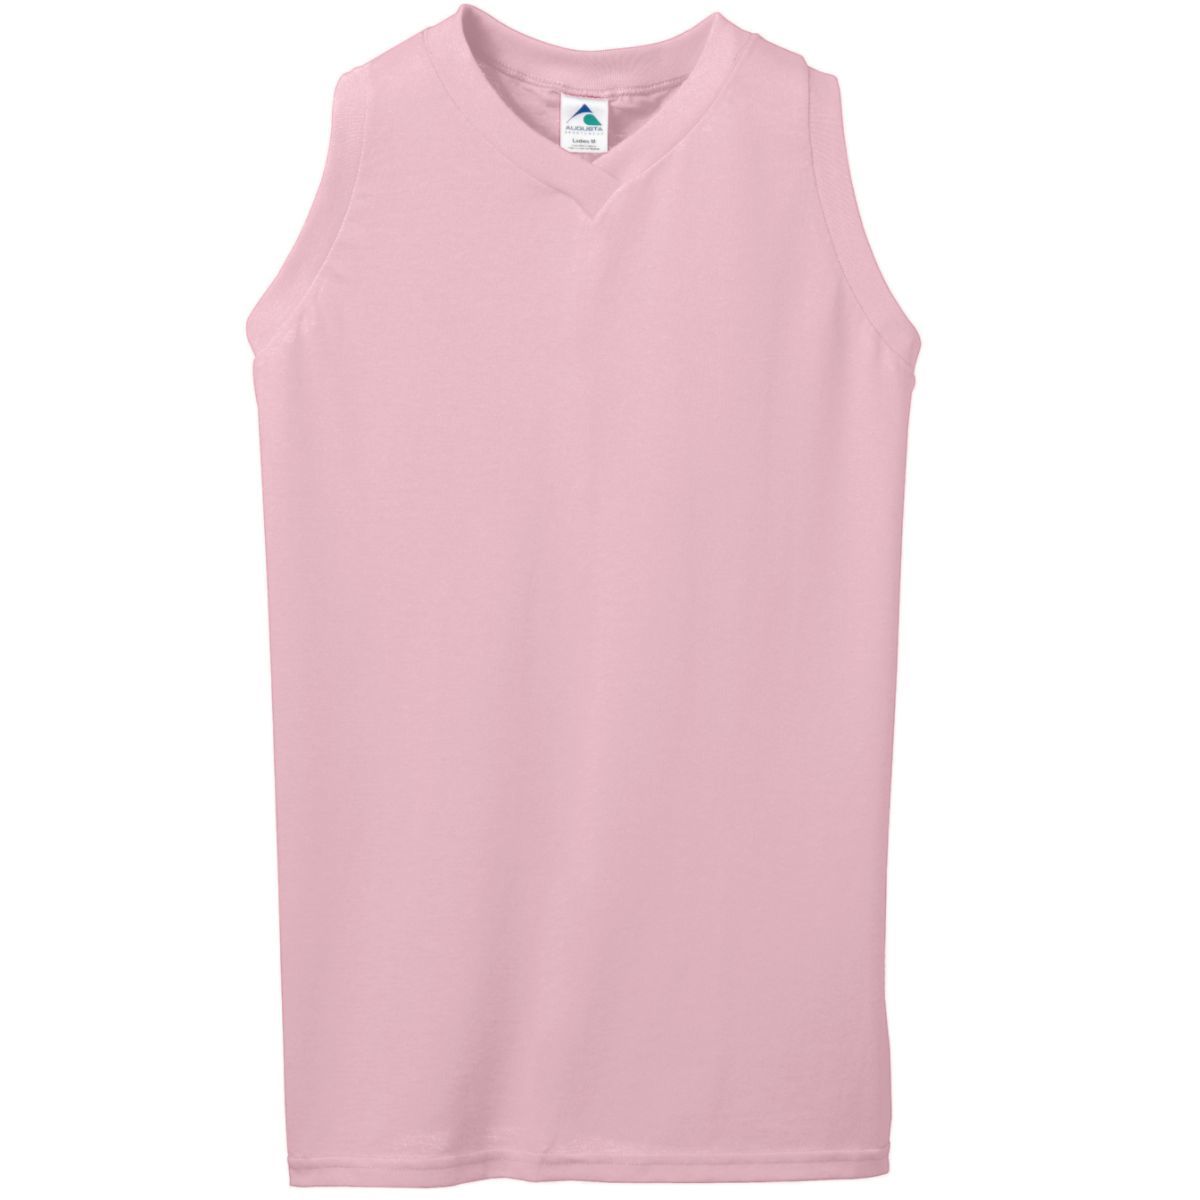 Augusta Sportswear Ladies Sleeveless V-Neck Poly/Cotton Jersey in Light Pink  -Part of the Ladies, Ladies-Jersey, Augusta-Products, Tennis, Shirts product lines at KanaleyCreations.com